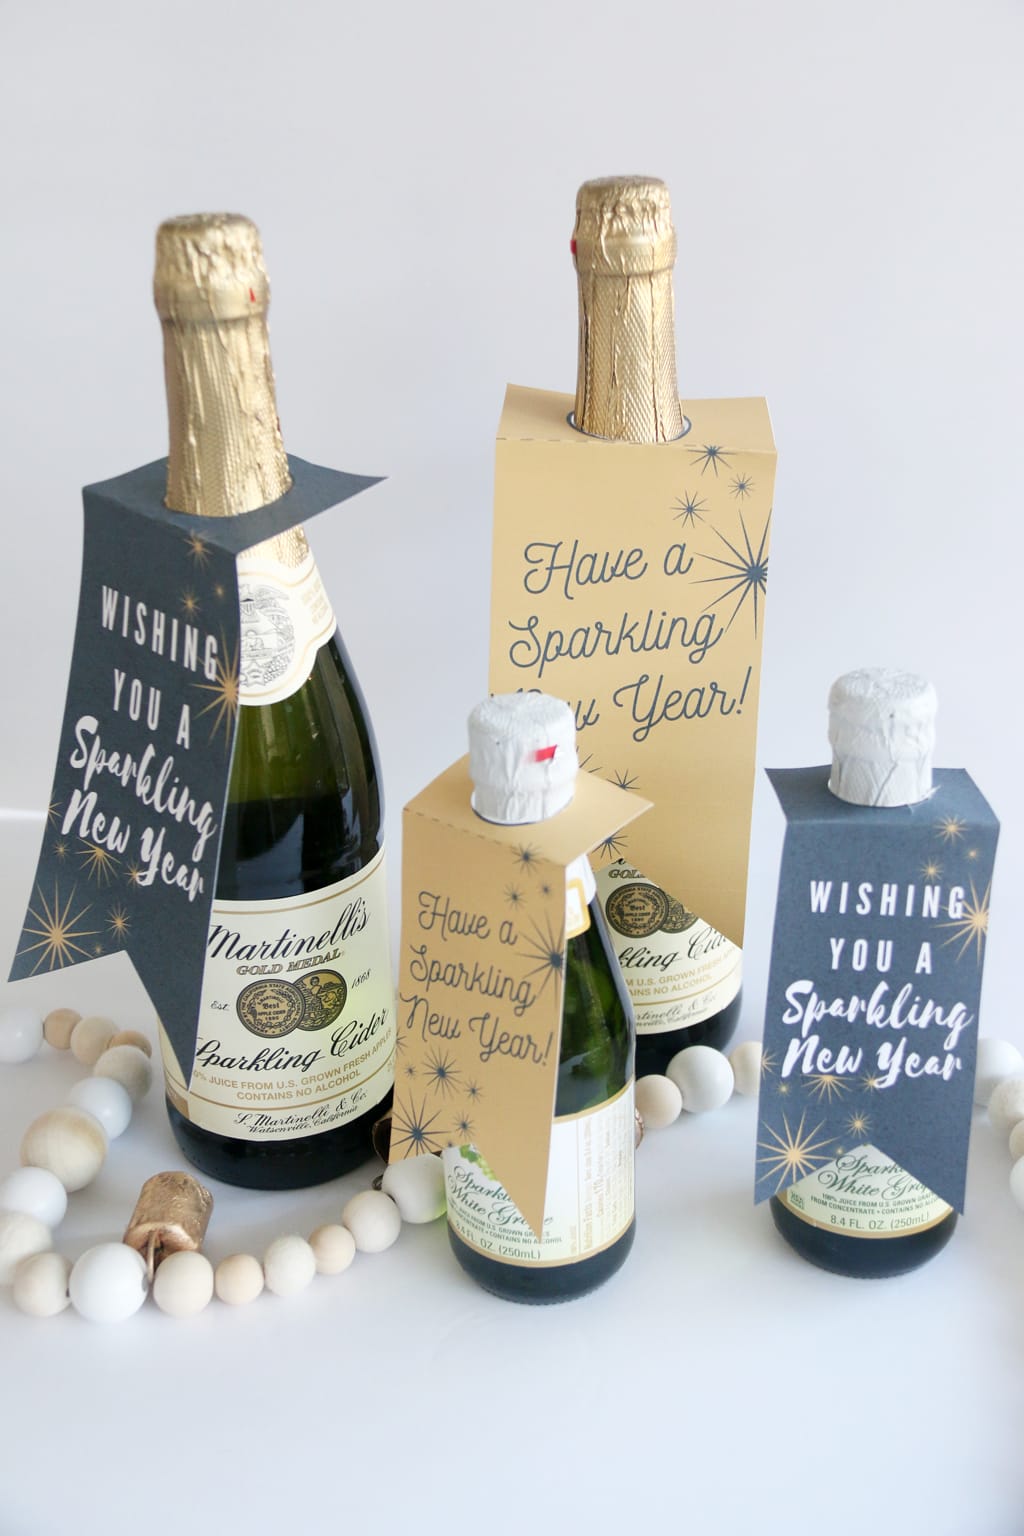 Large and small bottles of sparkling cider with New Year Sparkling Cider Gift Tags on them